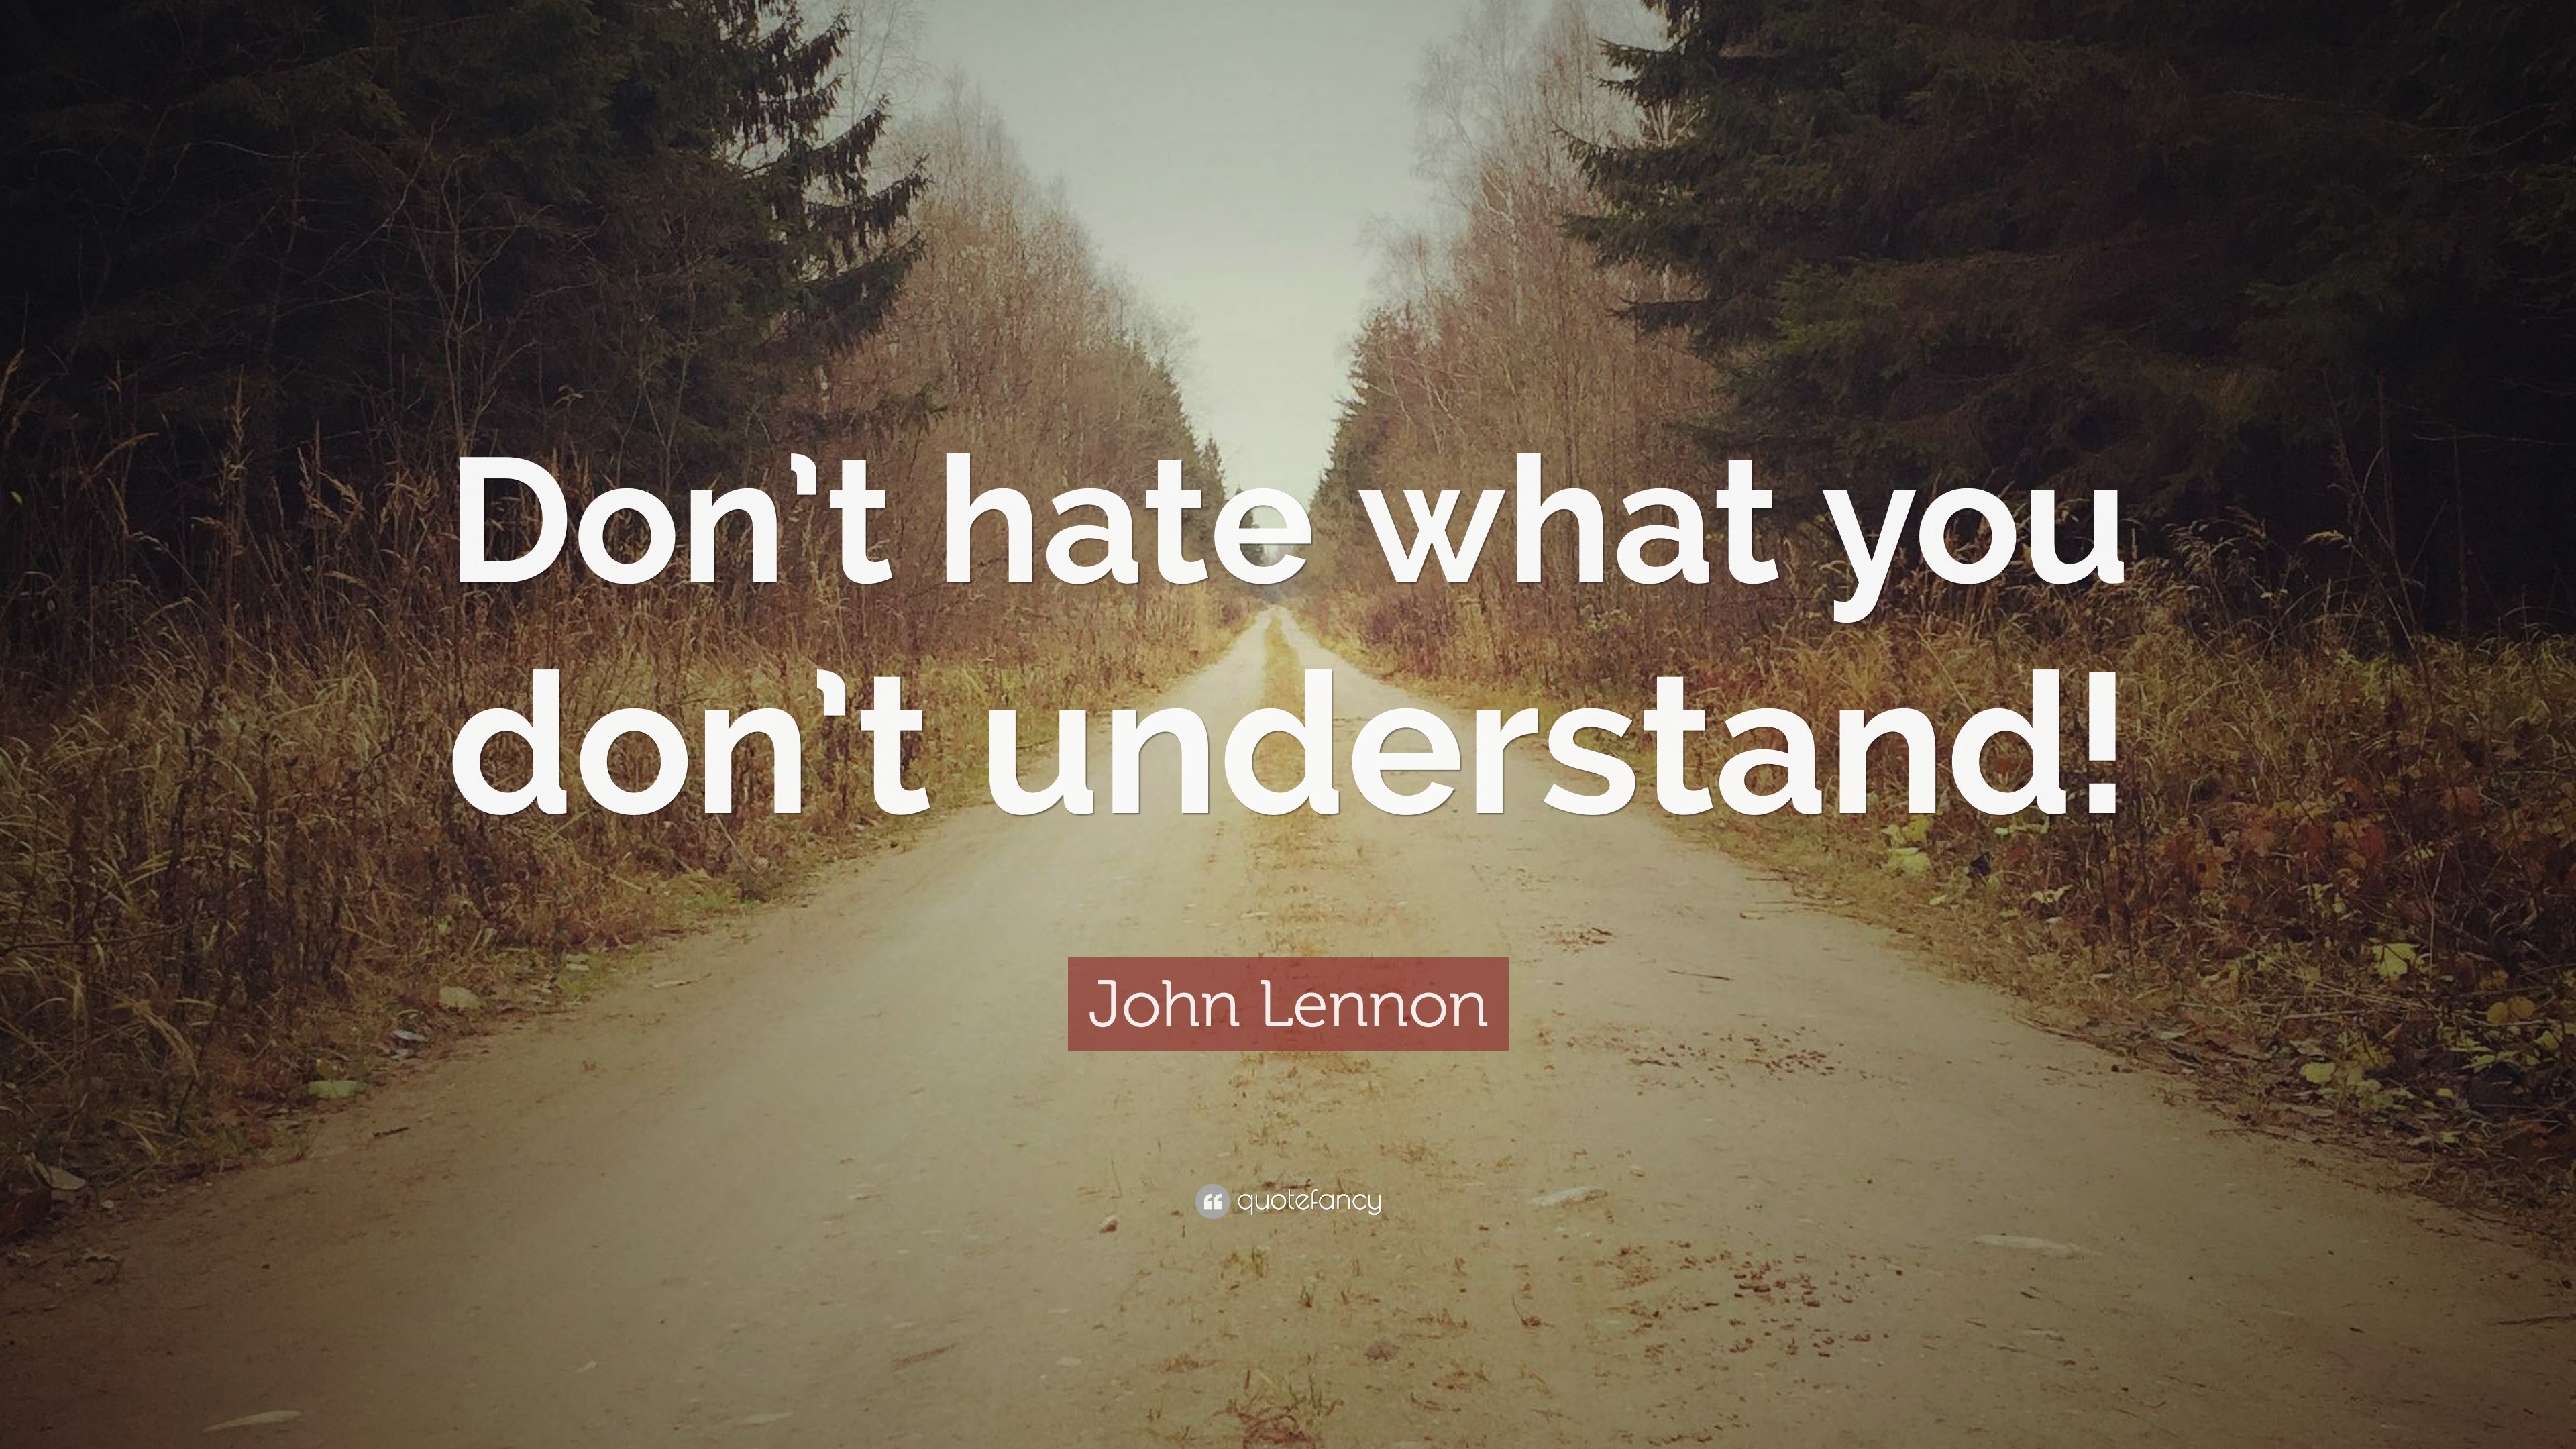 460871-John-Lennon-Quote-Don-t-hate-what-you-don-t-understand.jpg